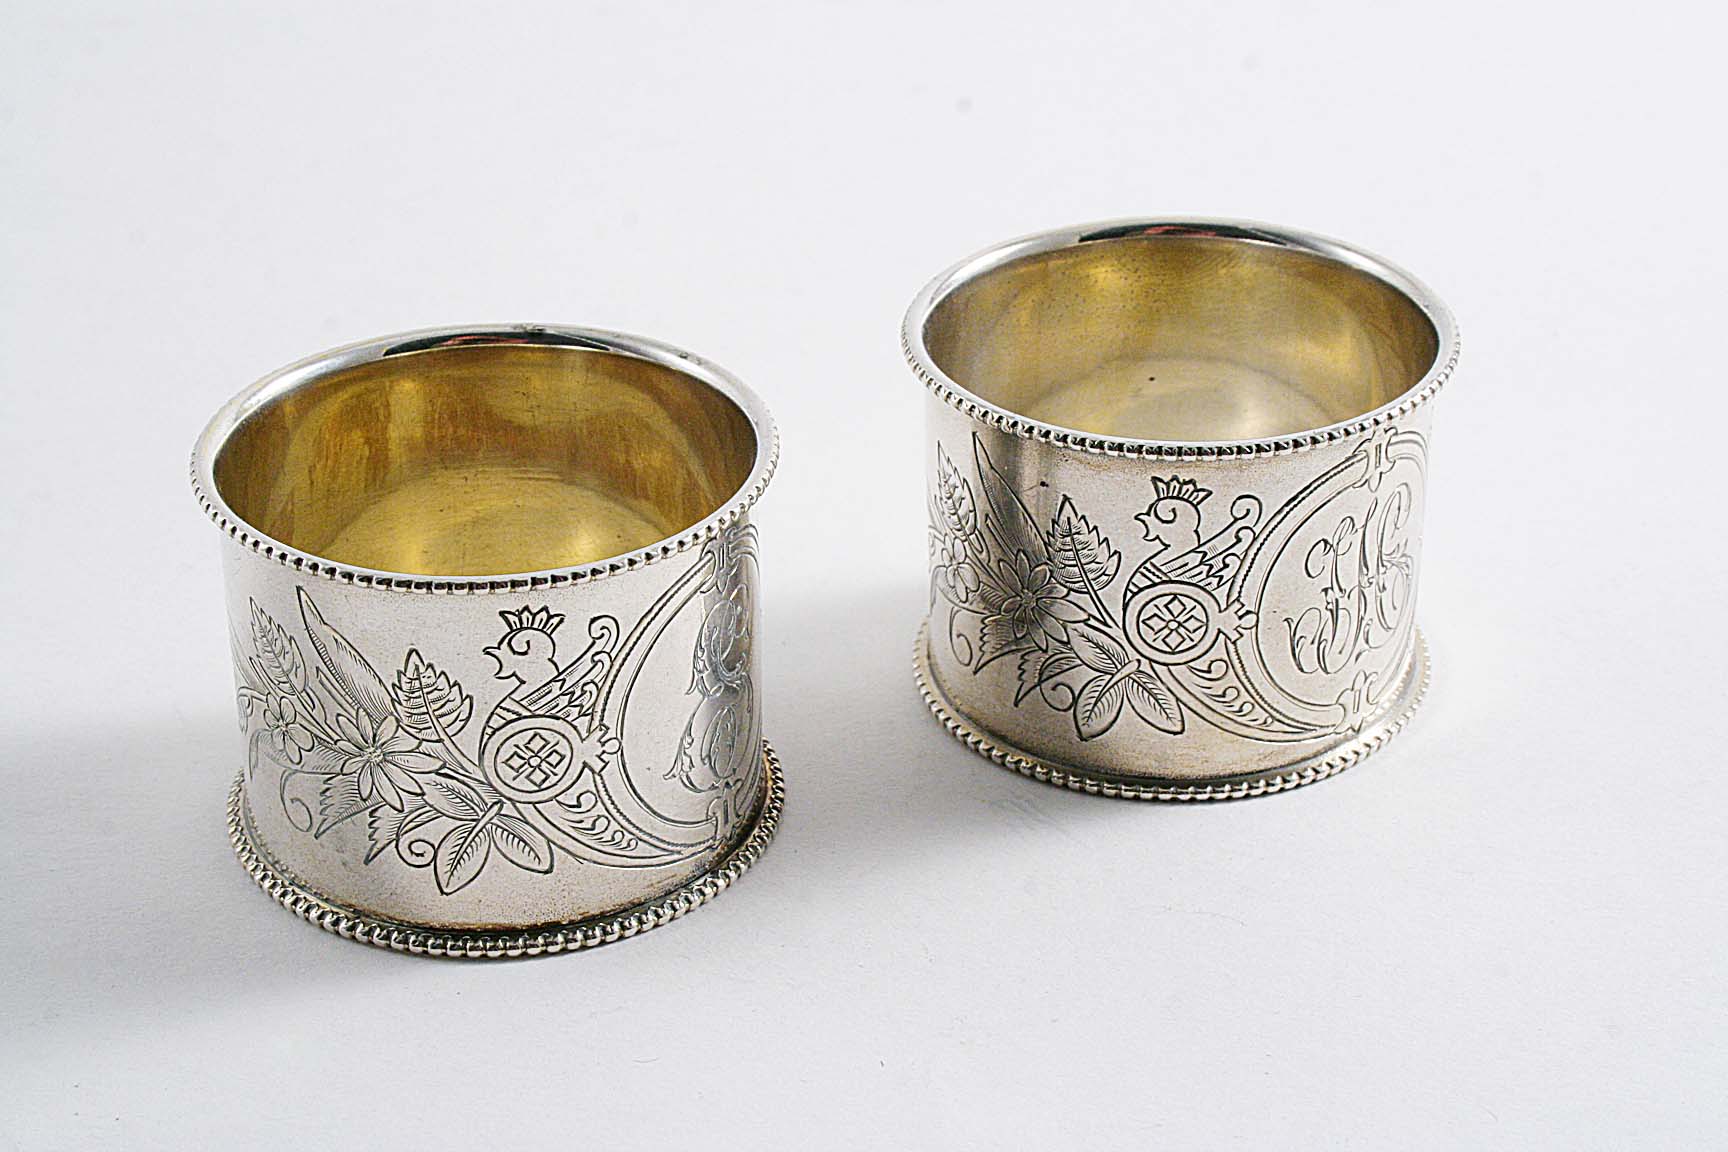 FABERGE:- A pair of late 19th century Russian engraved napkin rings, one initialled "ES", the